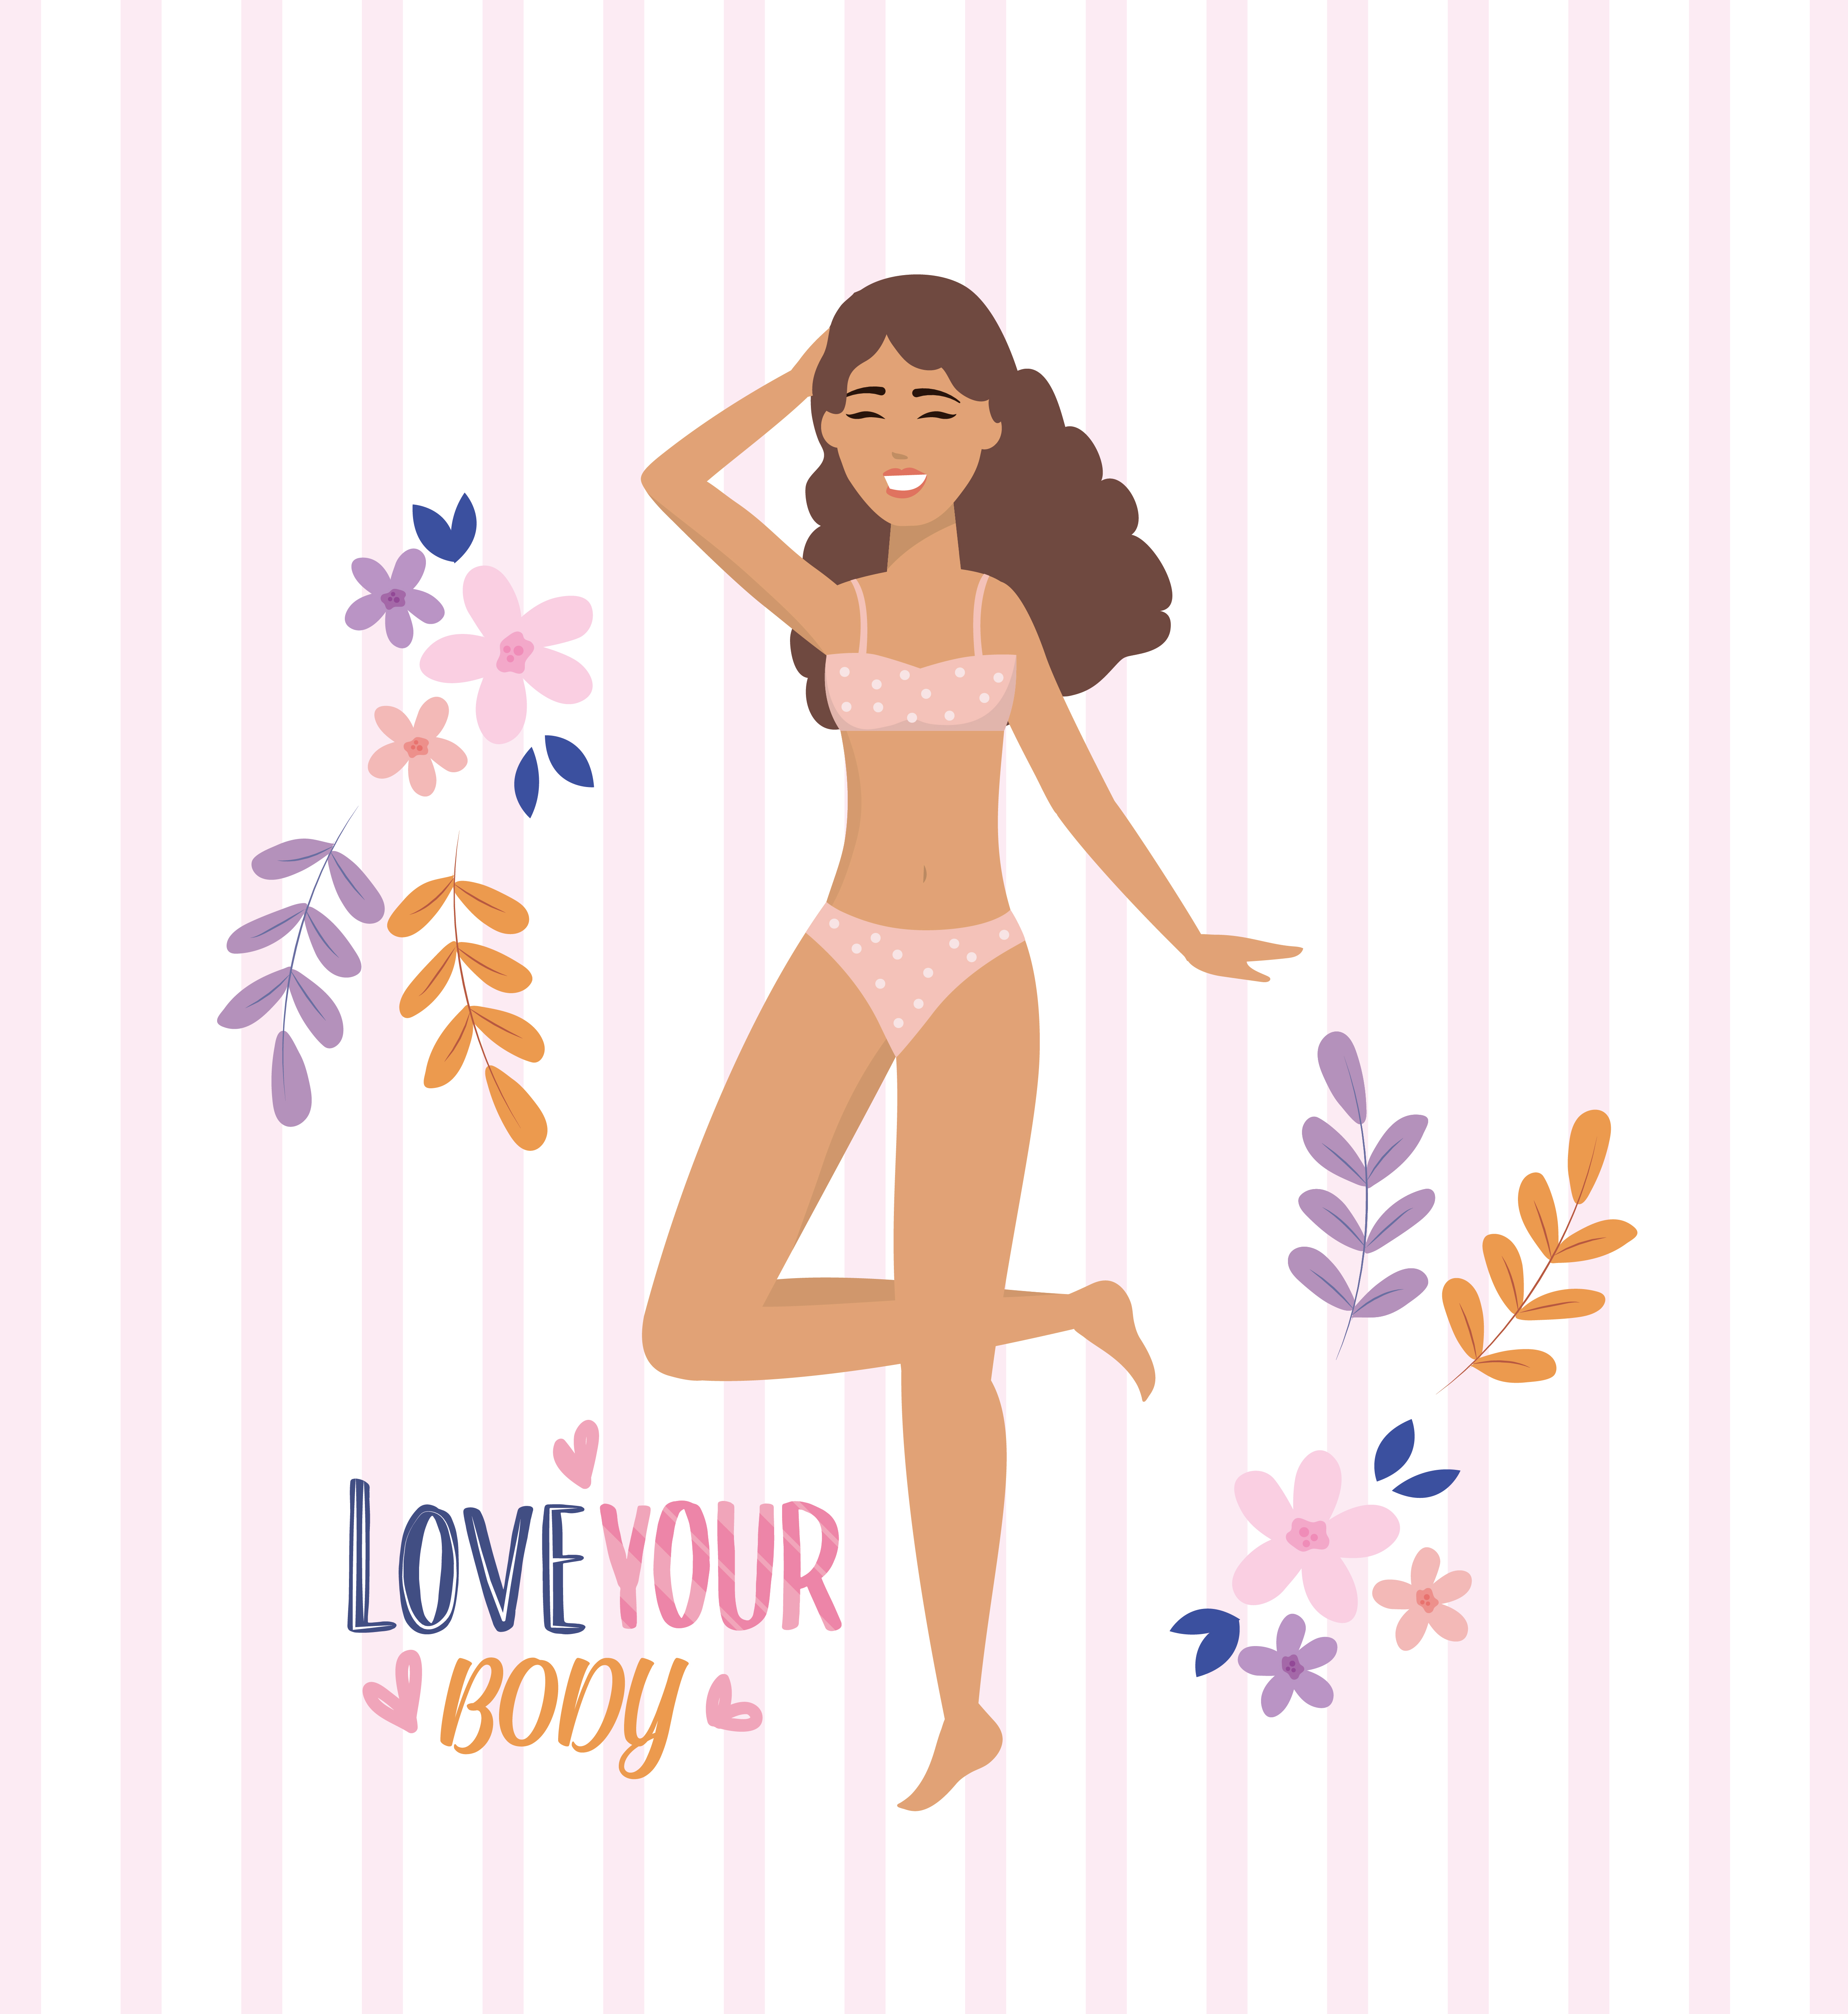 https://static.vecteezy.com/system/resources/previews/000/670/697/original/vector-love-your-body-poster-with-woman-in-underclothes-with-flowers.jpg